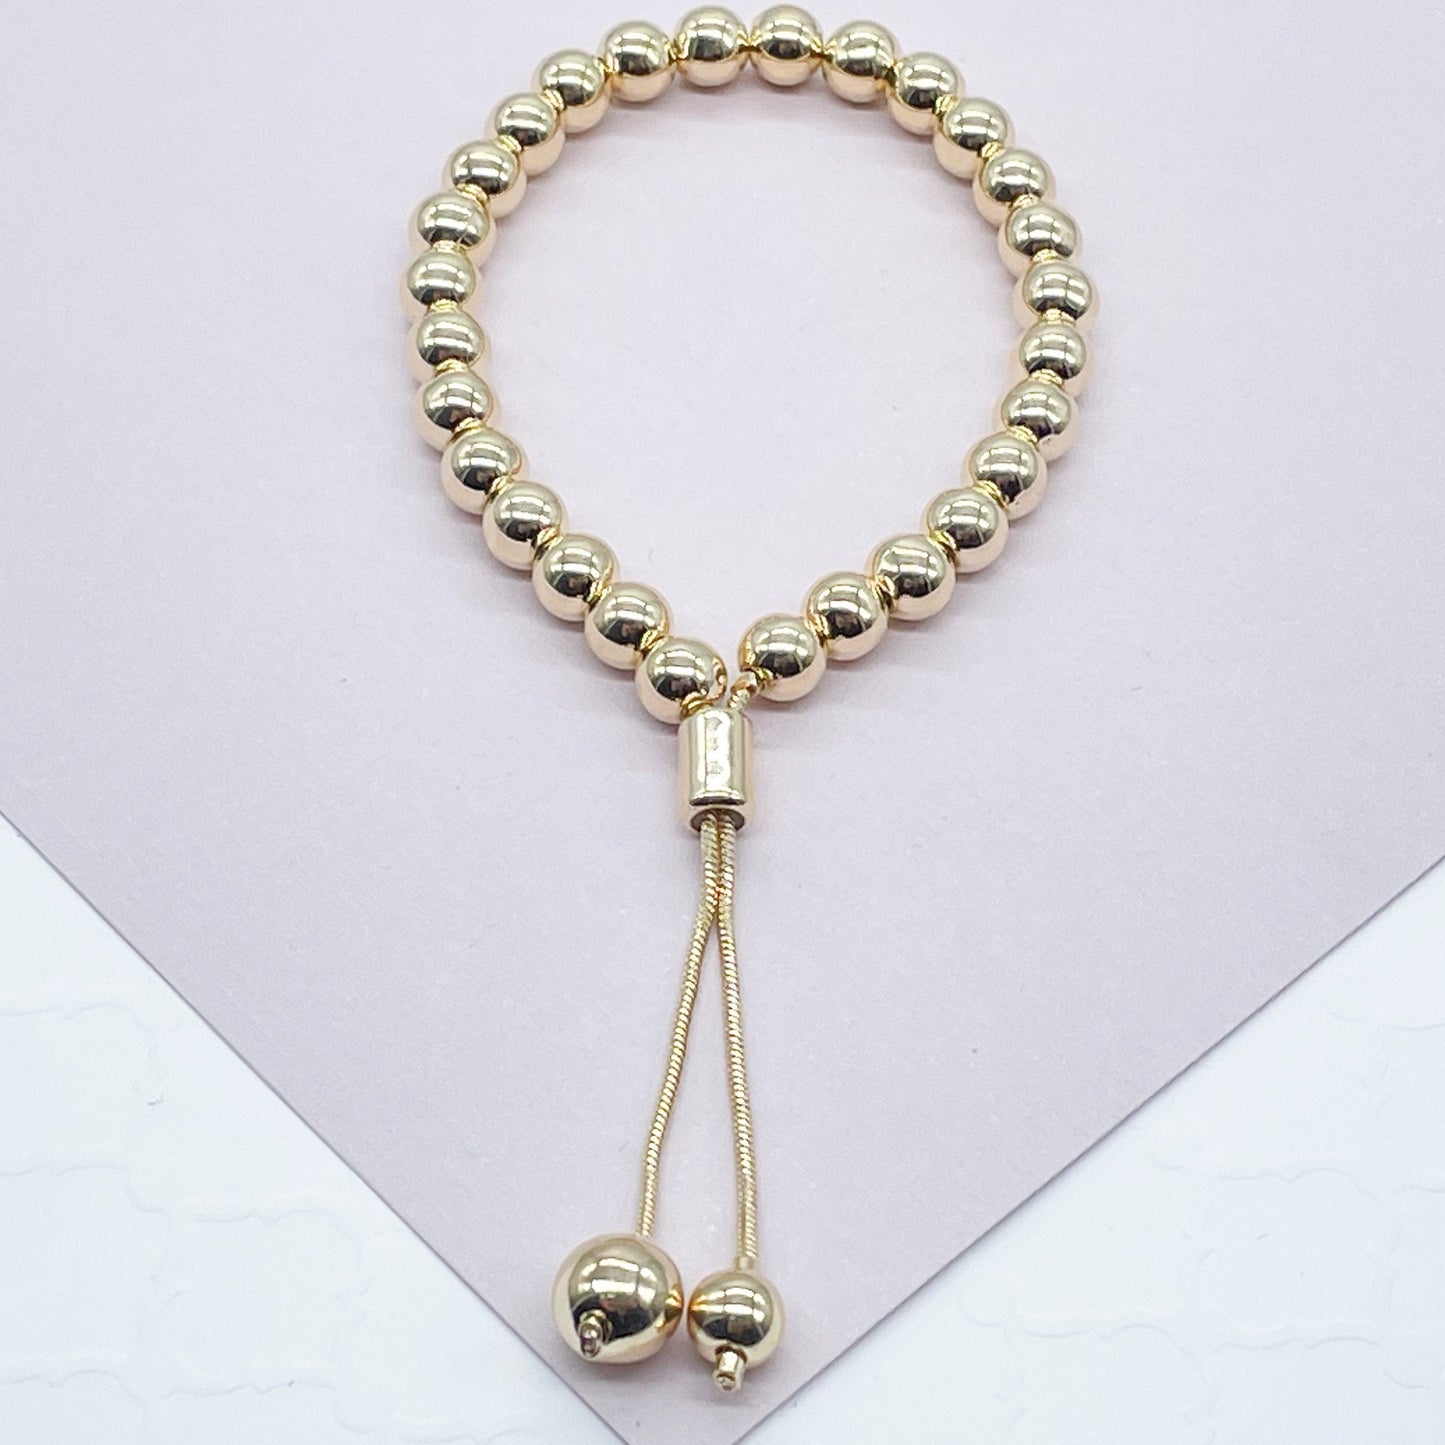 Gorgeous 18k Gold Layered Beaded Bracelet Featuring Slide Clasp Gold Bead